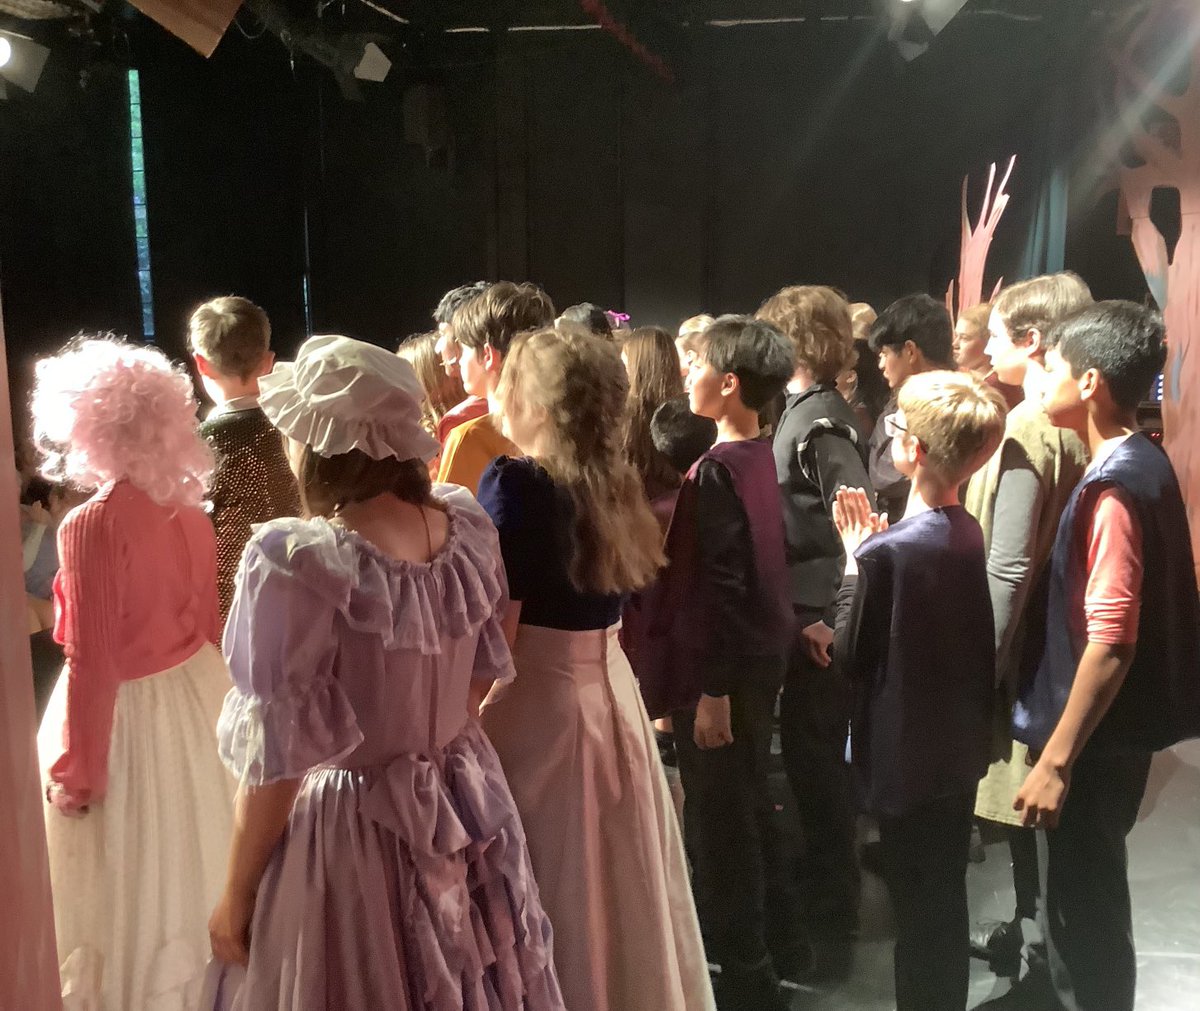 And just like that, it was over. This week, the cast of ‘Beauty and the Beast’ have pulled together to create something greater than the sum of its parts. It has been wonderful to see BD and GD students, in years 7 - 9, supporting each other and putting the production first. 🤩